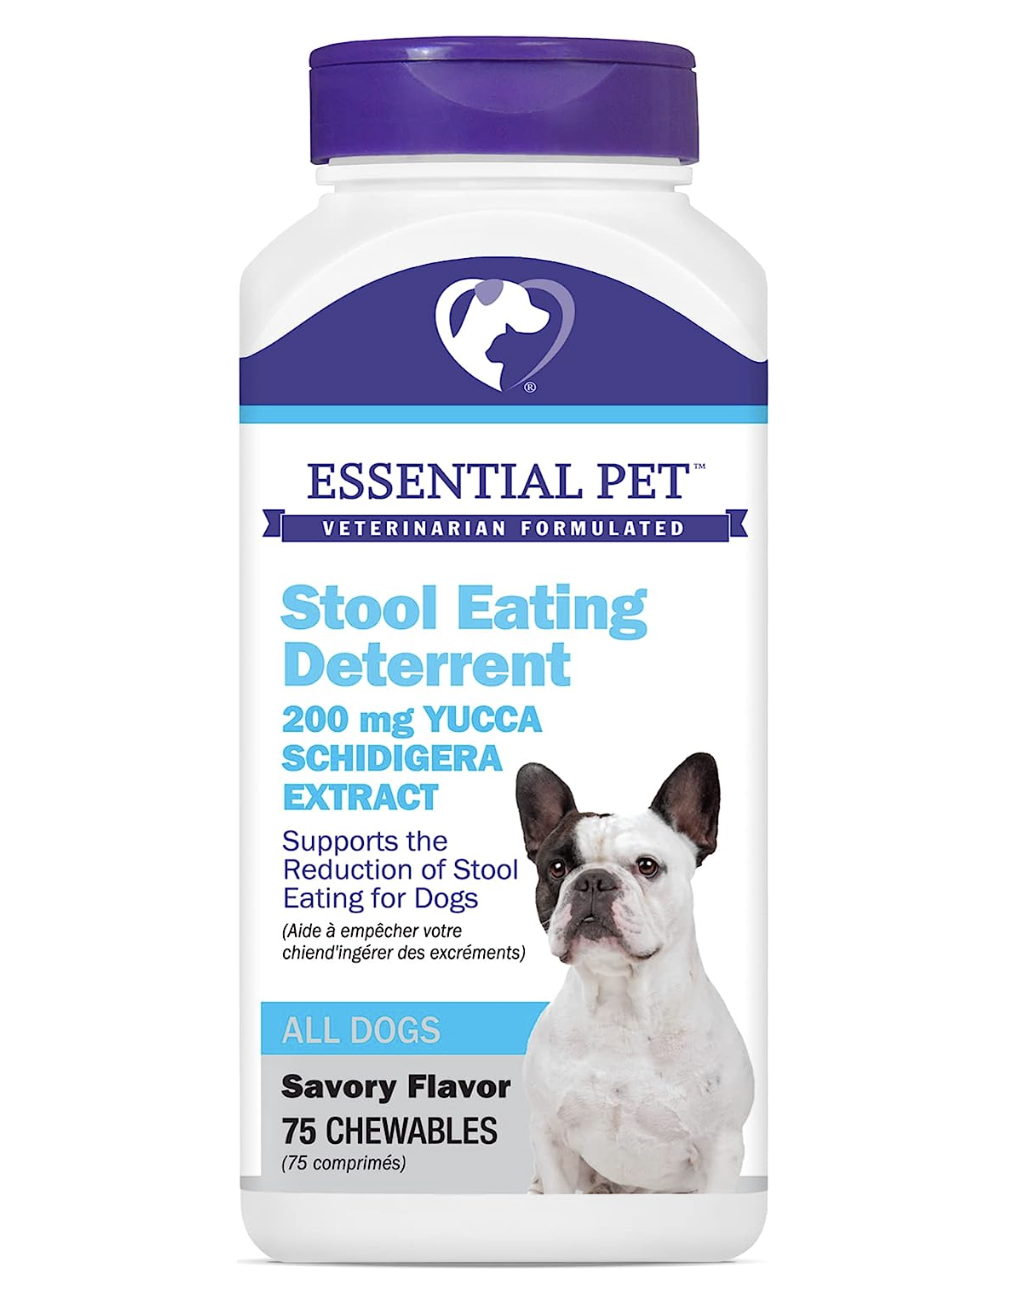 11. Stool Eating Deterrent with Yucca Schidigera Extract for Dogs